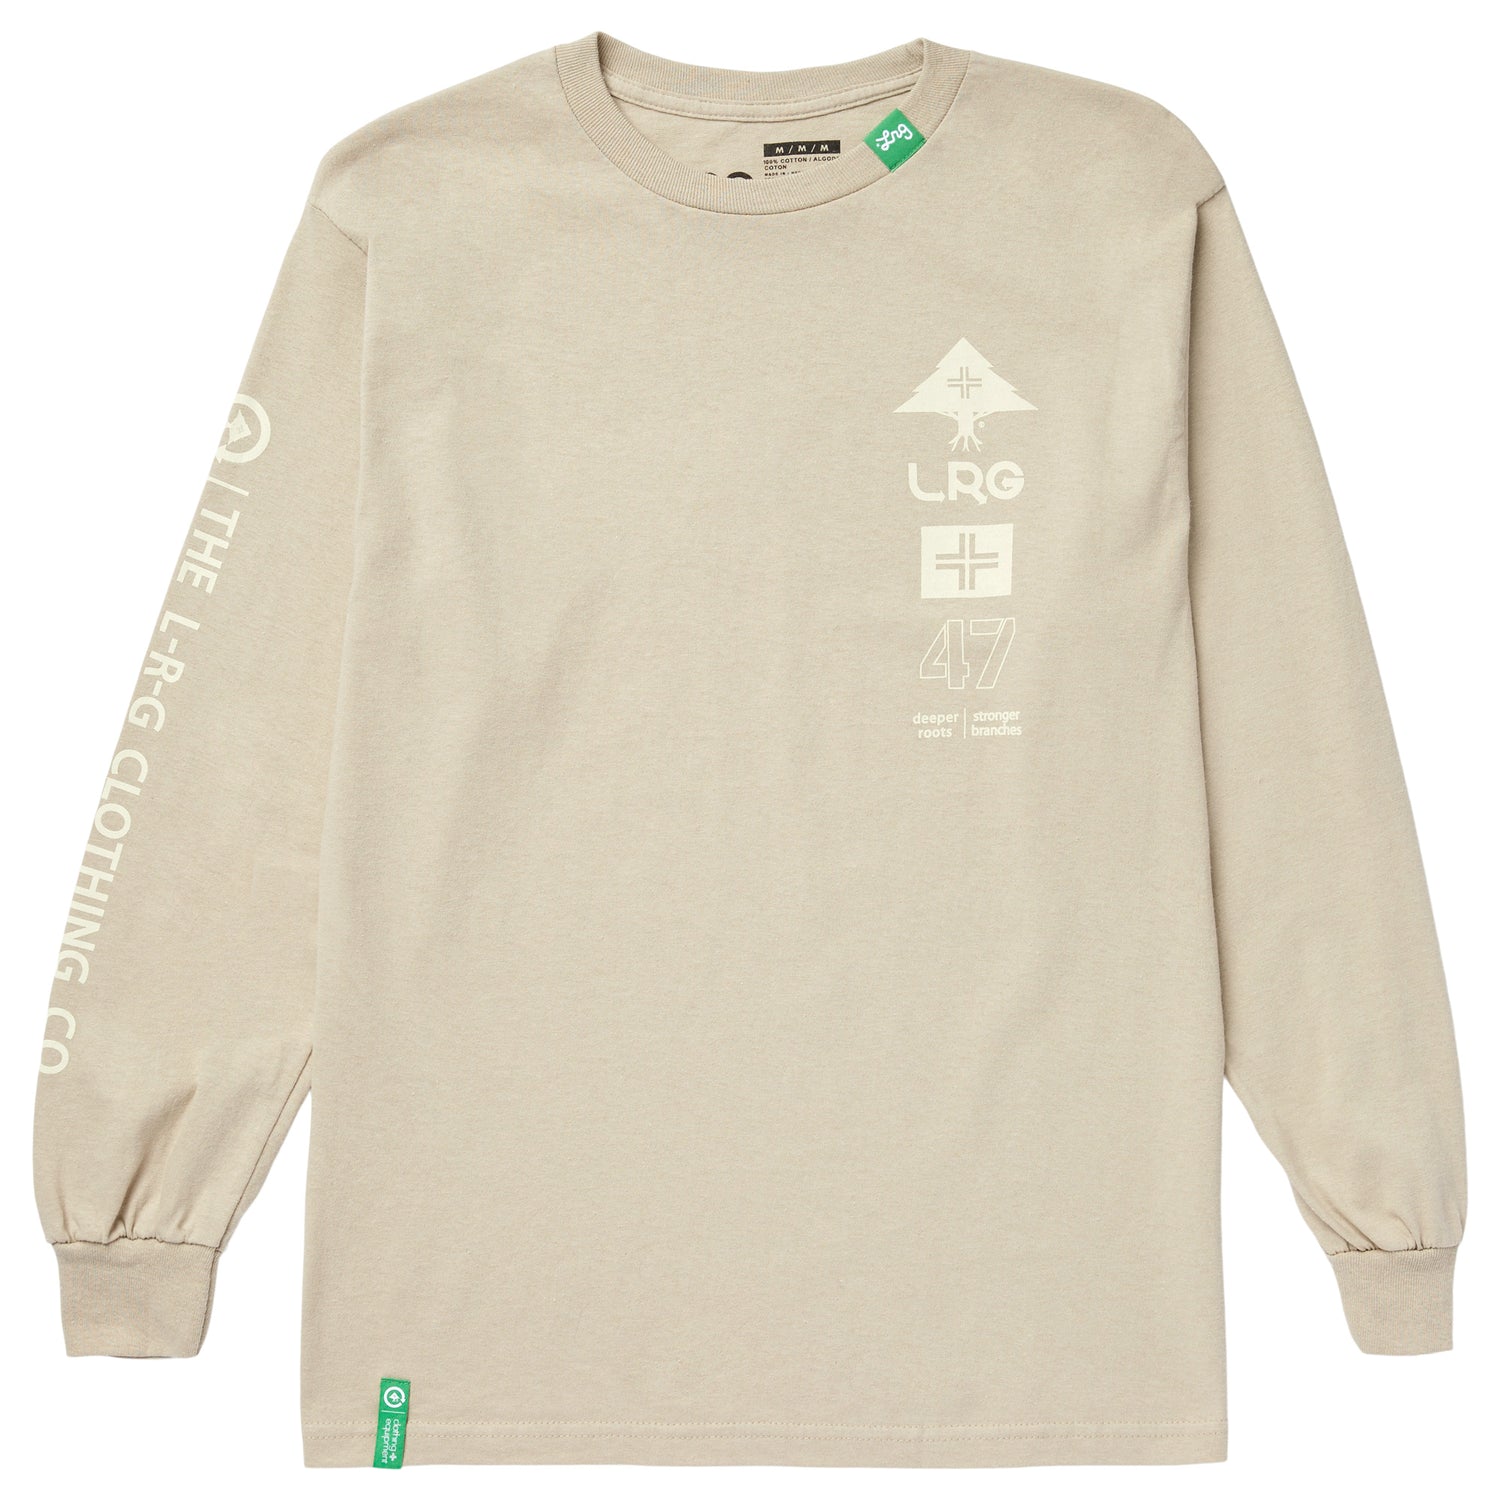 STRONGER BRANCHES LONG SLEEVE - SAND